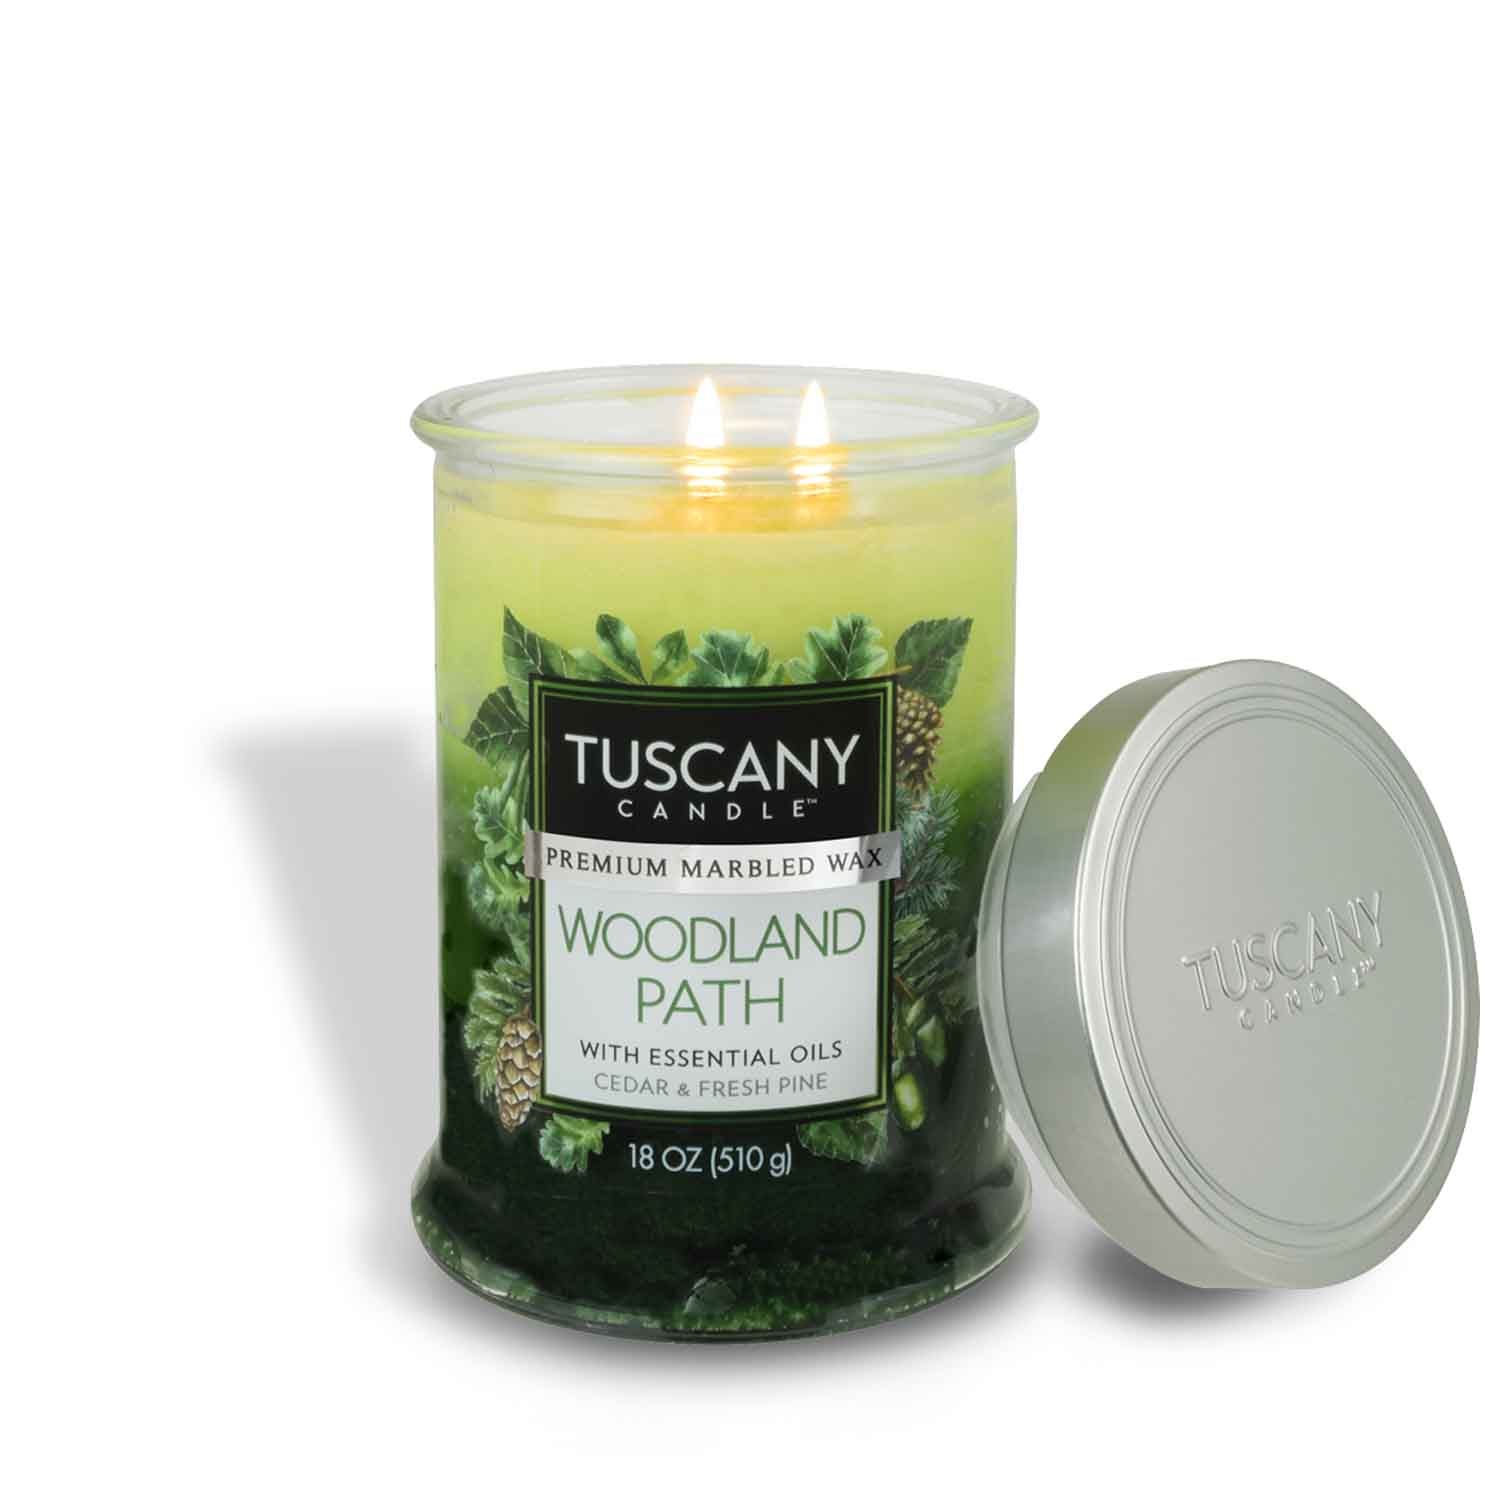 Experience the essence of Tuscany with our Woodland Path Long-Lasting Scented Jar Candle (18 oz) infused with luxurious essential oils from Tuscany Candle® EVD.